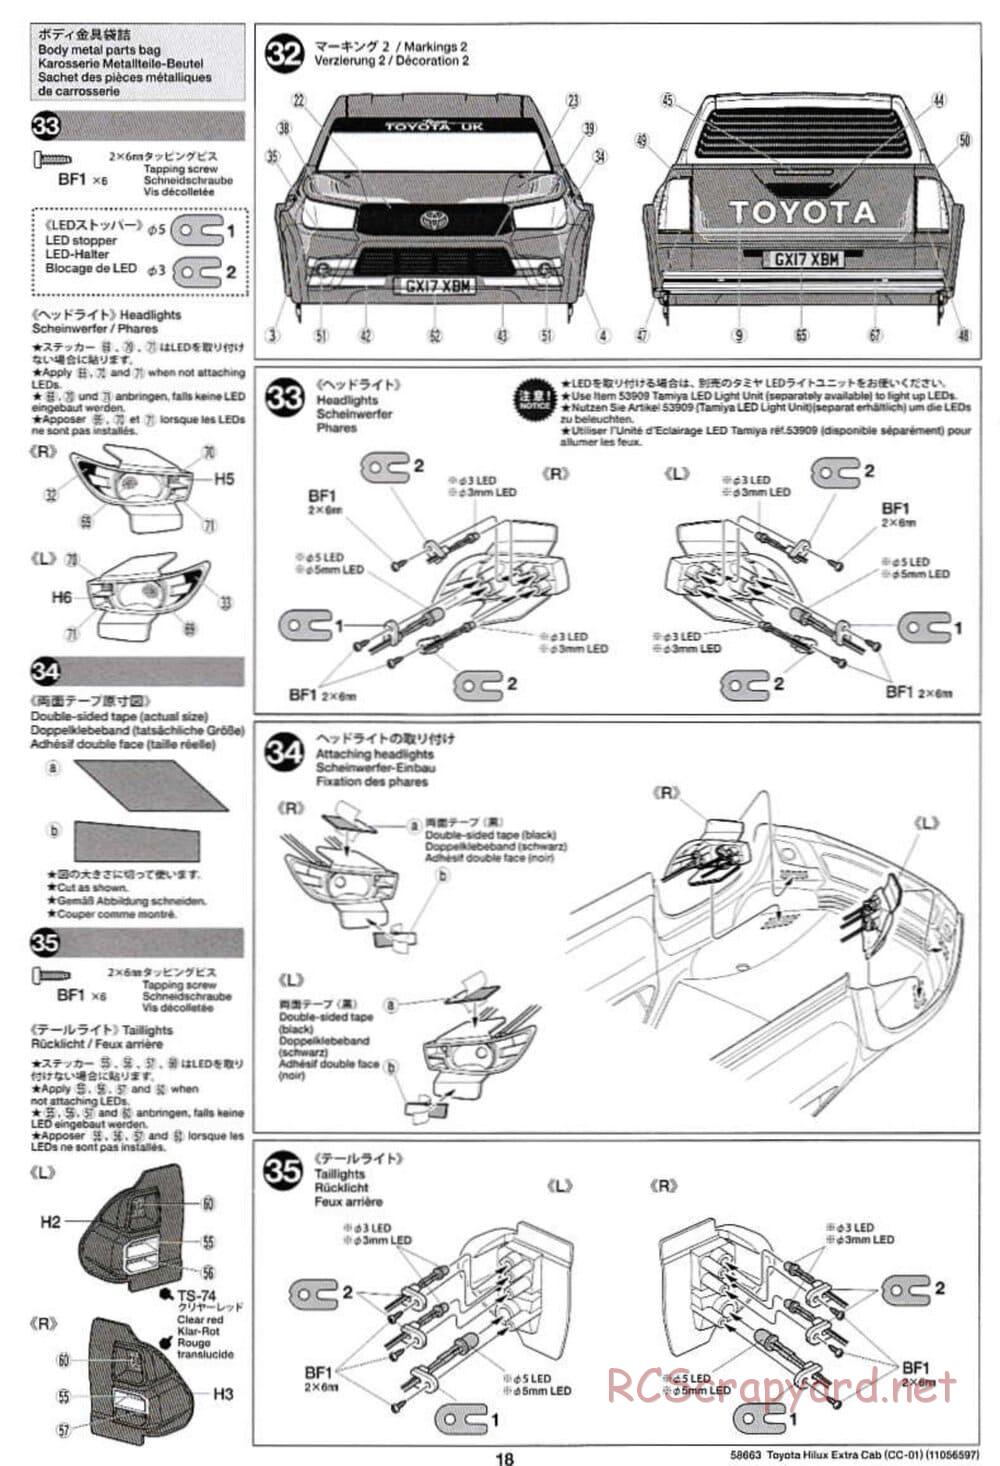 Tamiya - Toyota Hilux Extra Cab - CC-01 Chassis - Manual - Page 18